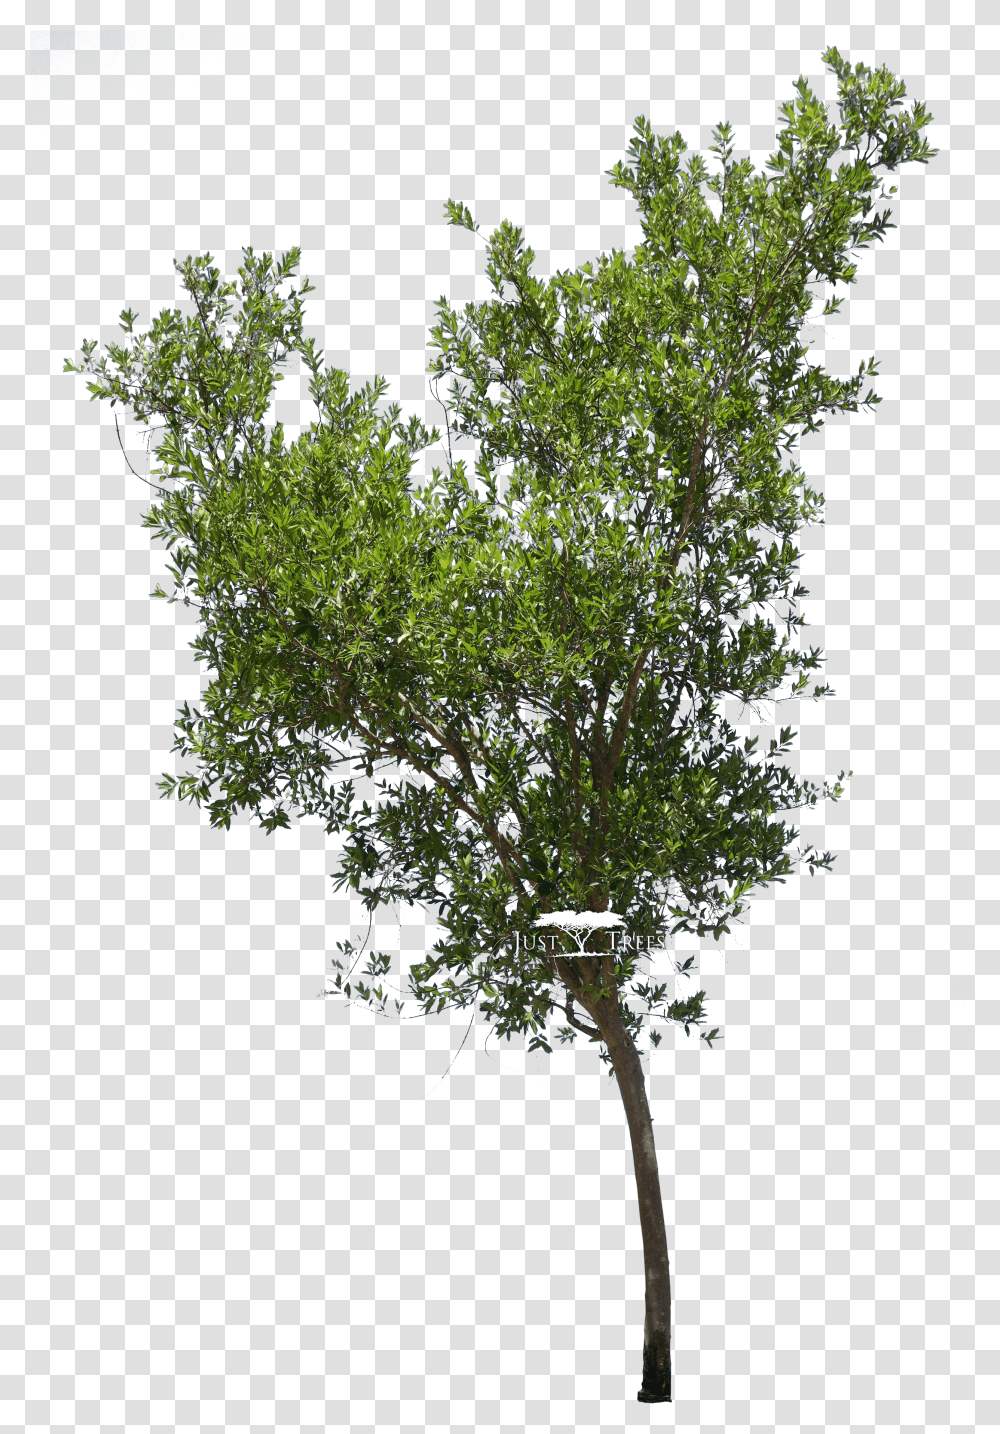 Bushes River Bush Willow Tree Drawing Transparent Png